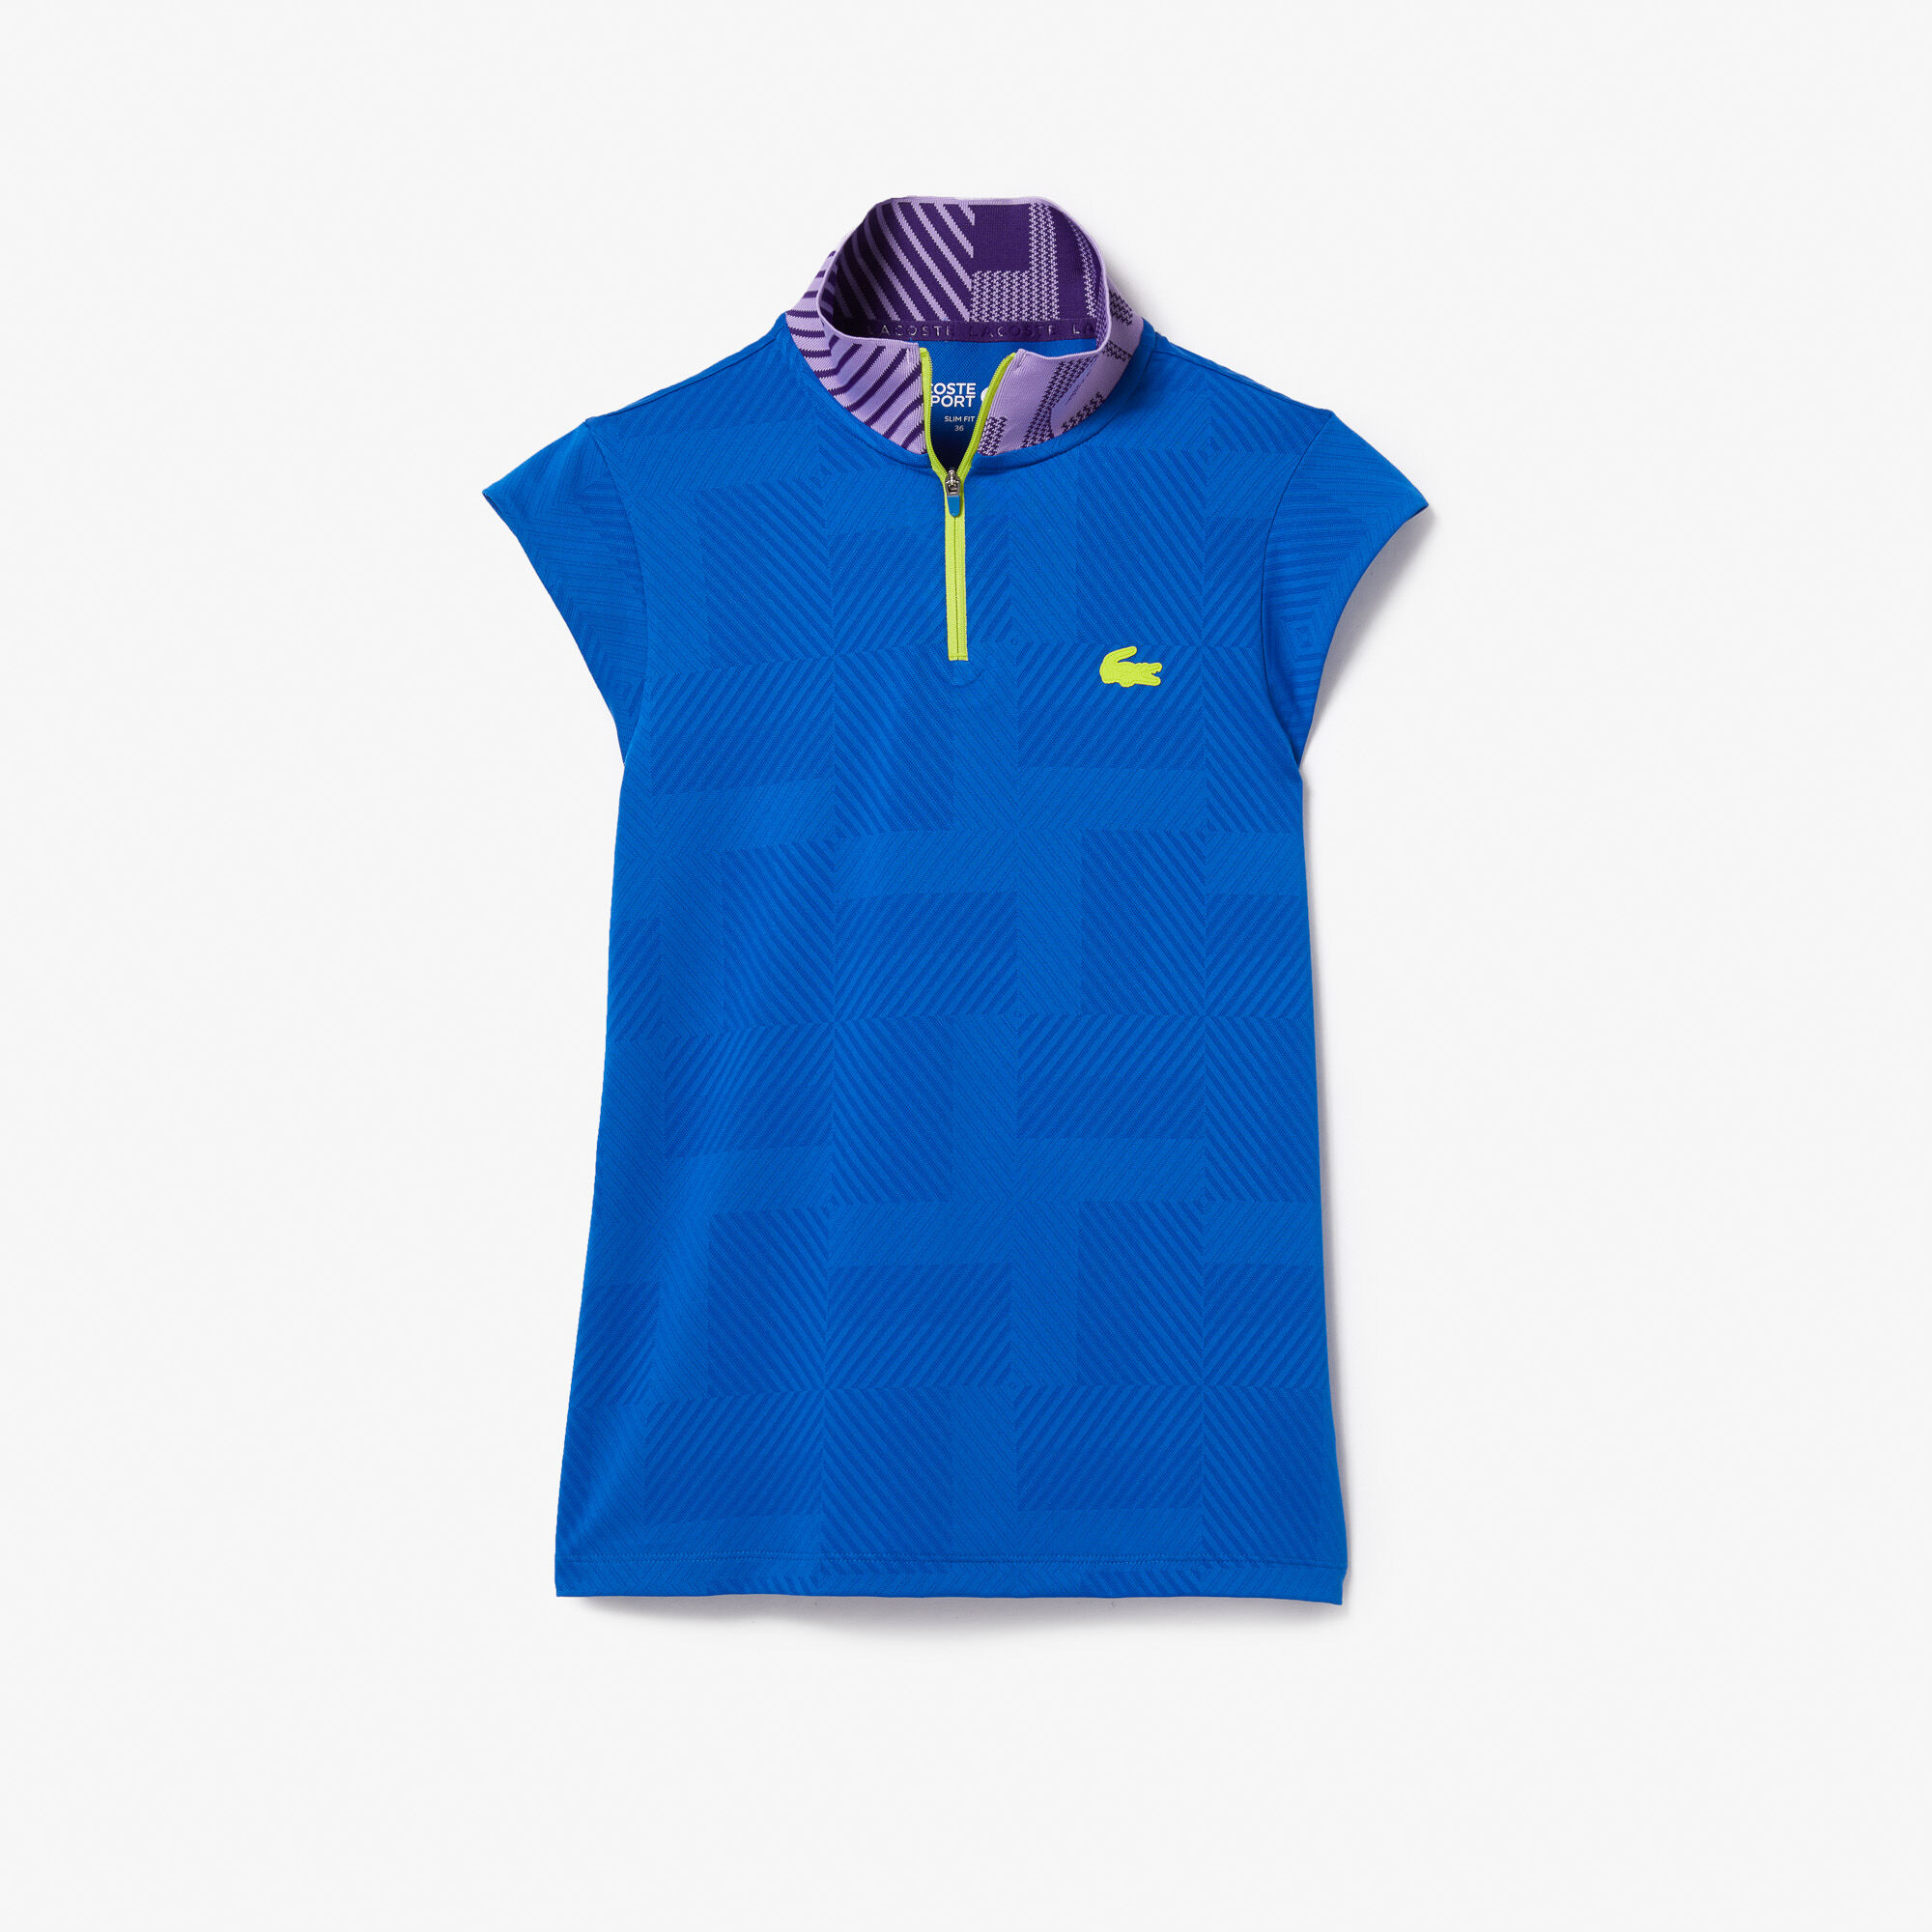 Find amazing products in Lacoste AE Navigation Catalog' today 